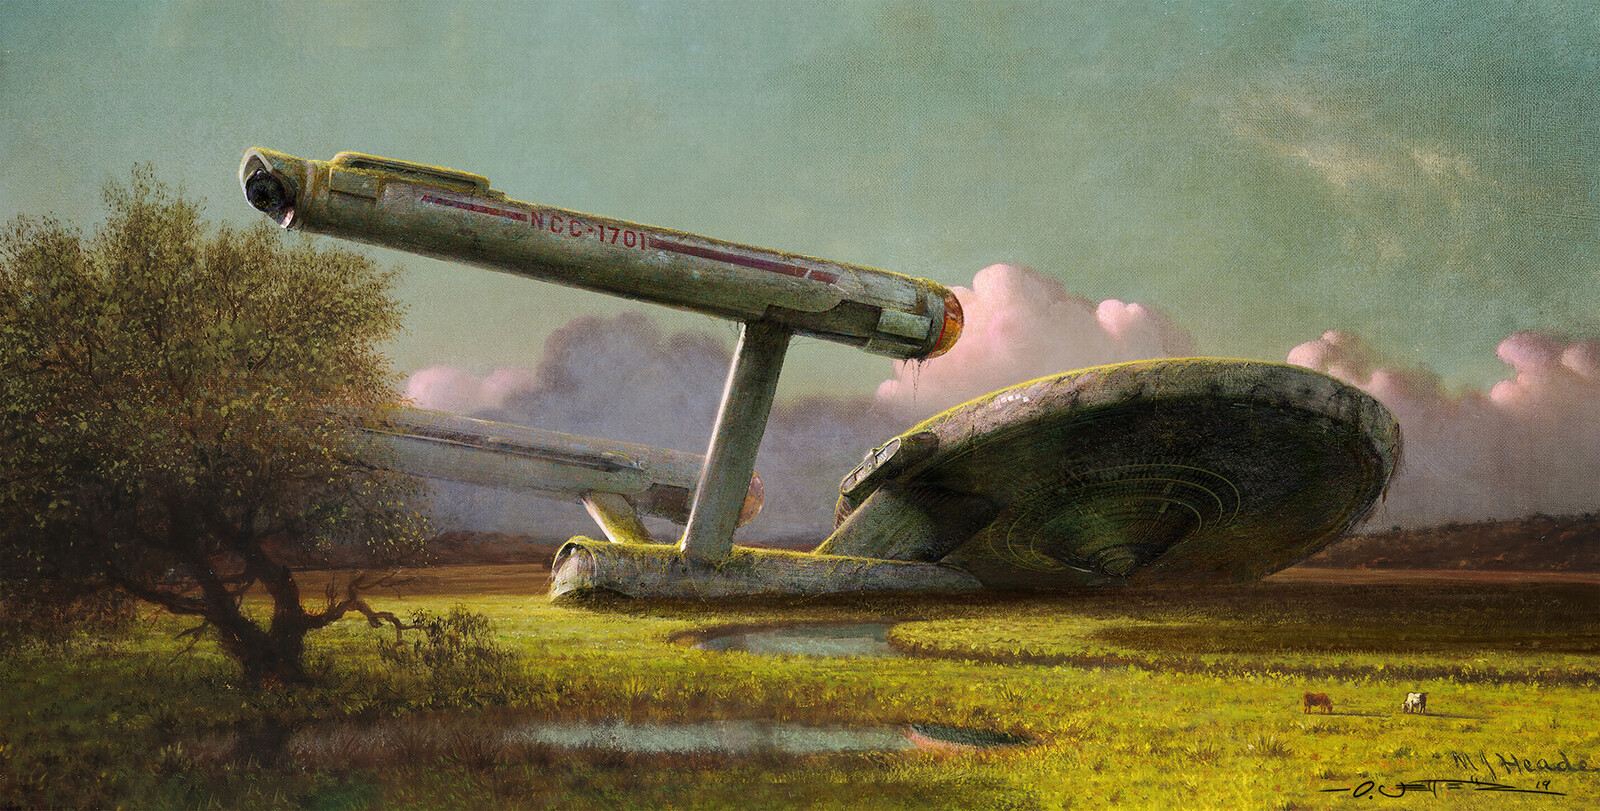 Forgotten NCC-1701 at the Meadow - after M.J. Heade